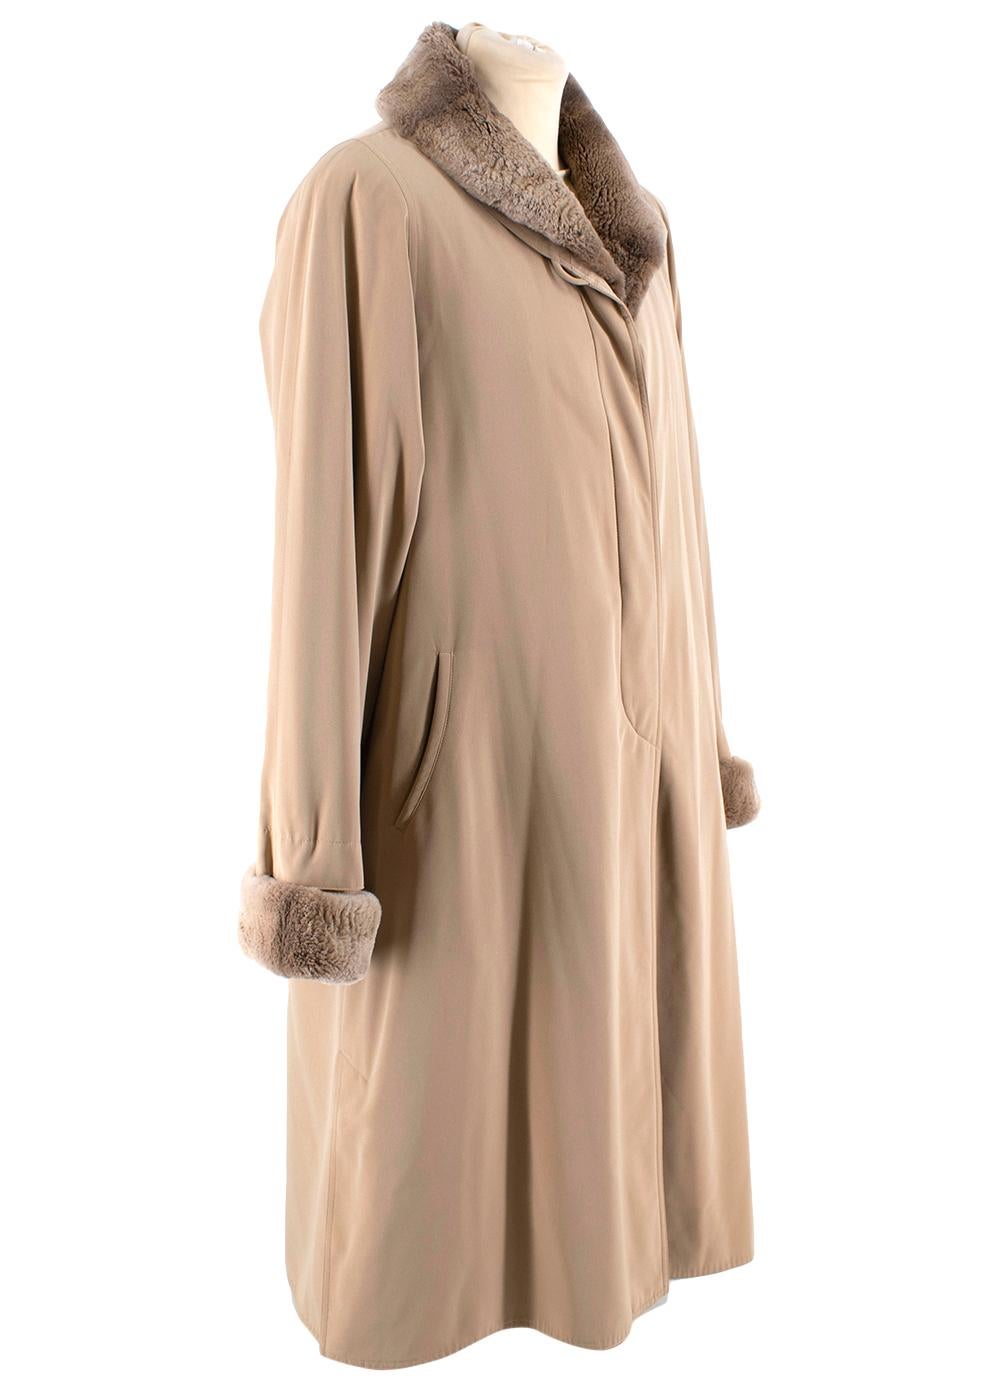 Jobis Beige Fur Inner-Lined Longline Coat

- Beige sheen outer 
- Faux fur inner lining 
- Faux fur collar and sleeve cuffs
- Front button fastening 
- Side welt pockets 
- Side vents 
- Detachable overcoat

Materials:
Main - 100% Polyester 
Lining